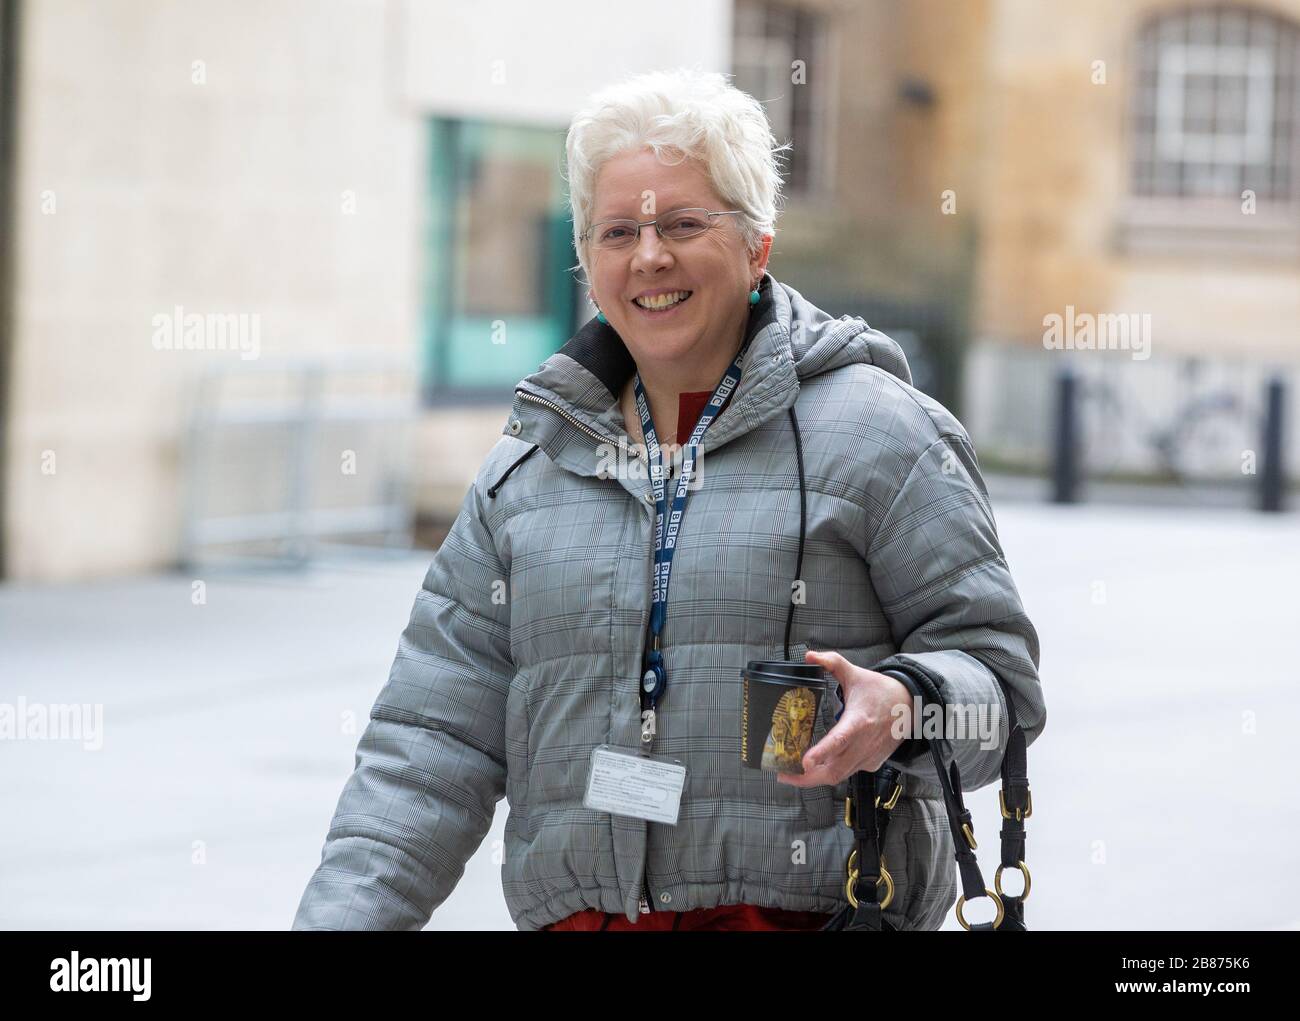 Carrie Gracie, former China editor for BBC News, arrives at the BBC studios in London. She resigned in Jan 2018 citing gender pay discrimination. Stock Photo